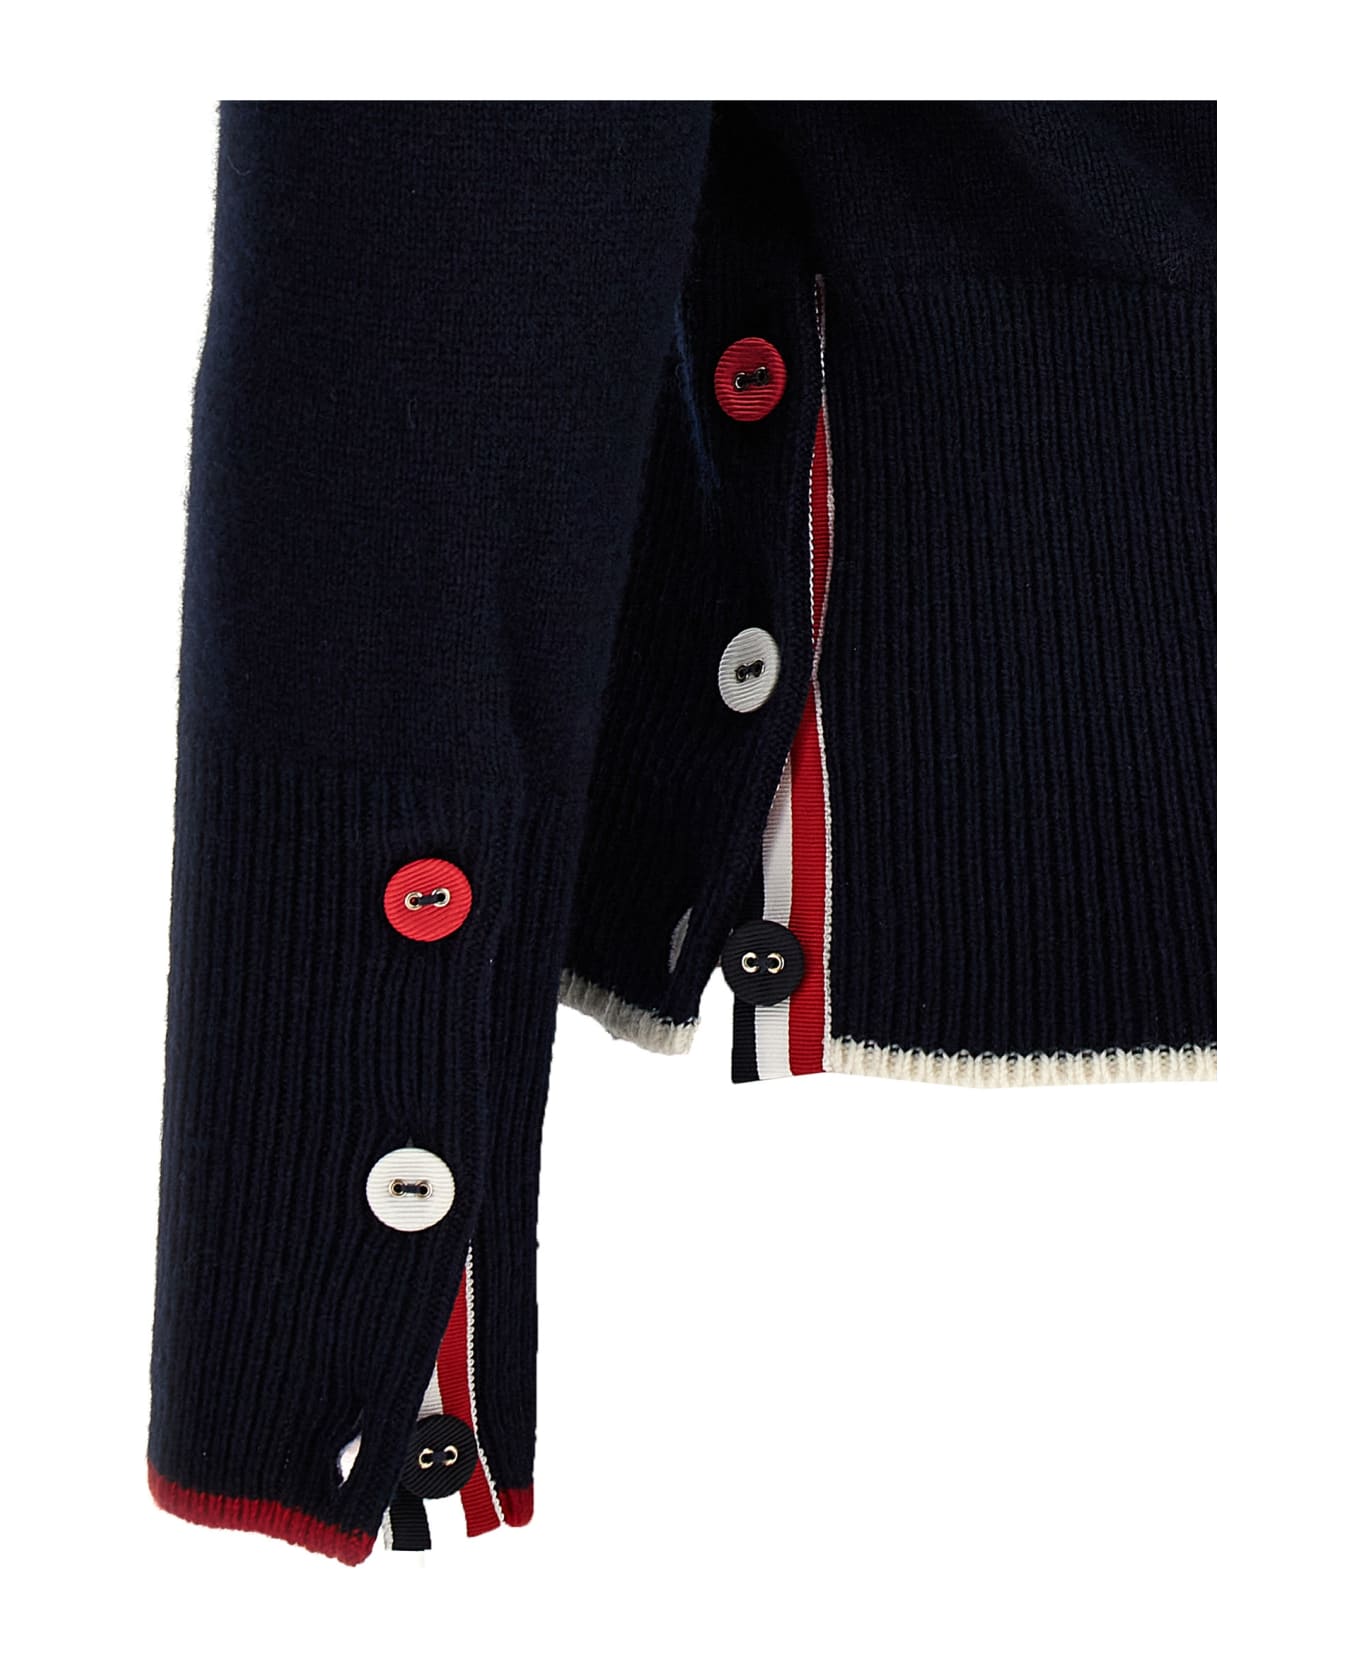 Thom Browne 'hector & Bow' Sweater - Blue ニットウェア